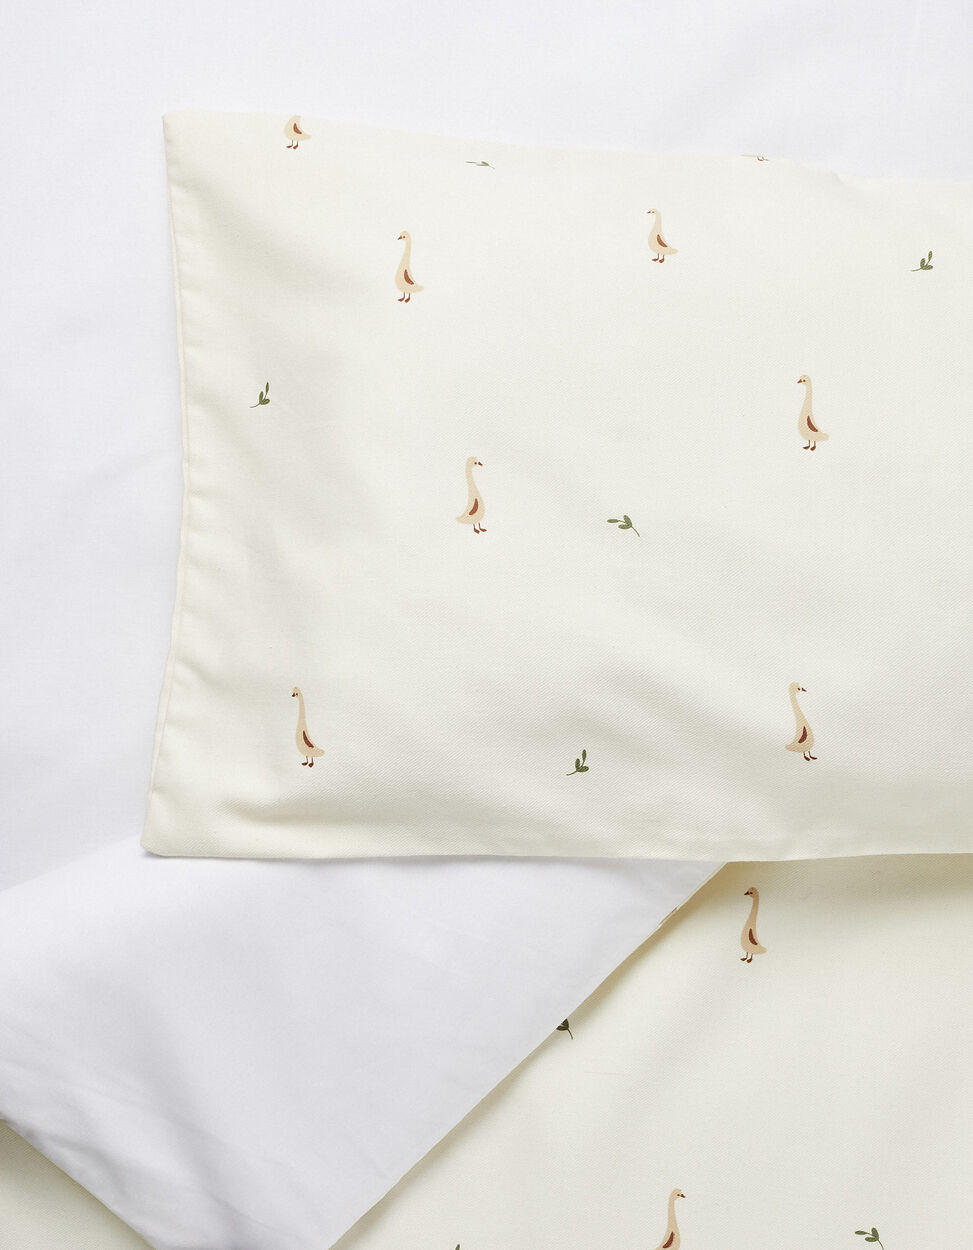 Duvet Cover, Filling and Pillowcase Gloop! for Bed 60X120Cm, Farm